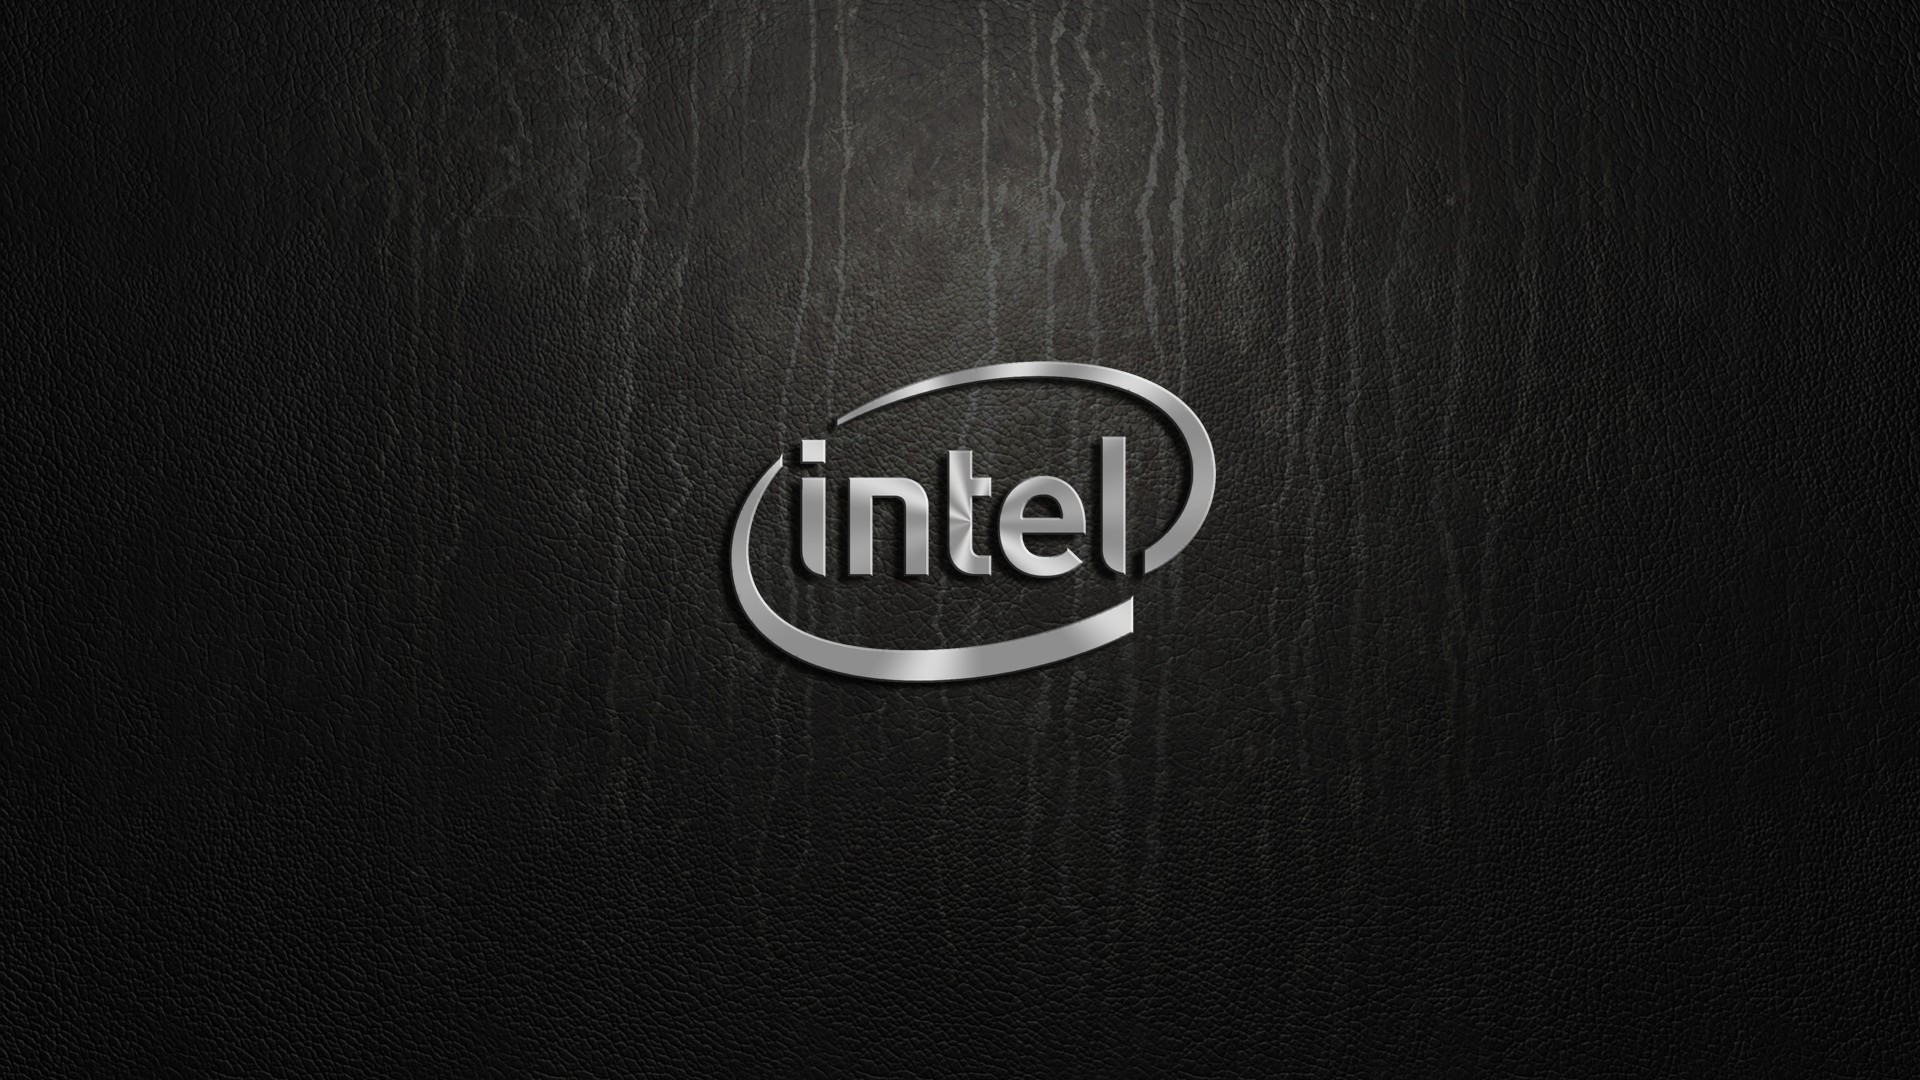 groei Jong Krachtig Intel HD Graphics 30.0.100.9955 DCH Is Available - Download Now